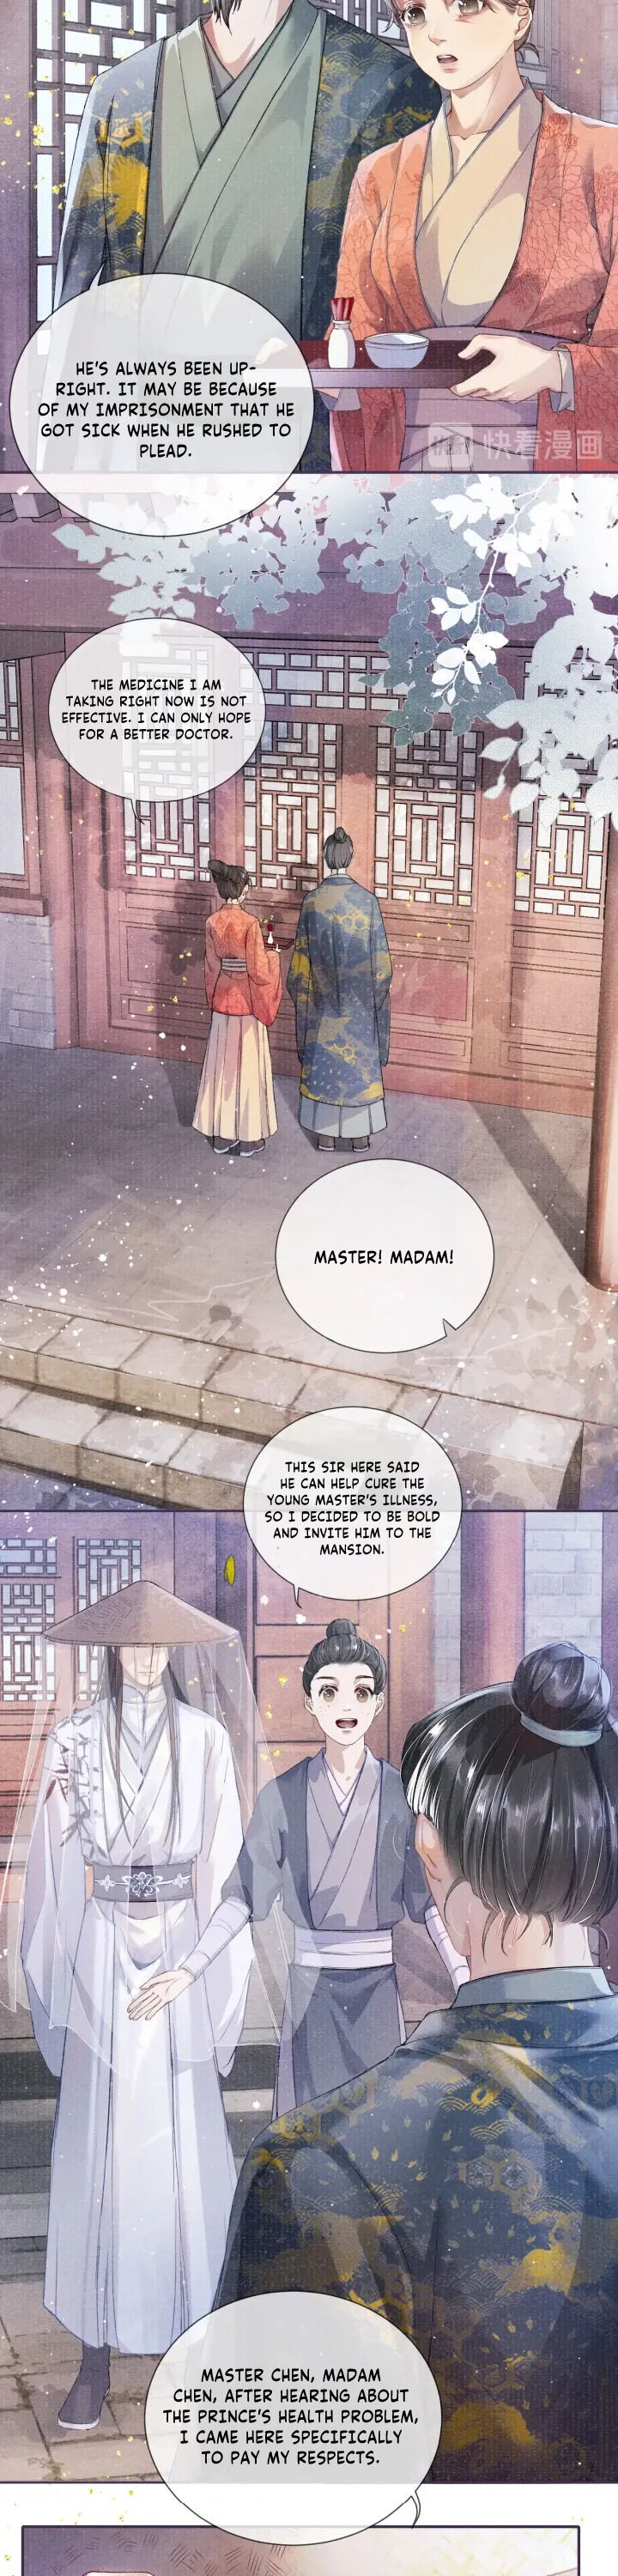 My Majesty Your Grace - Page 2